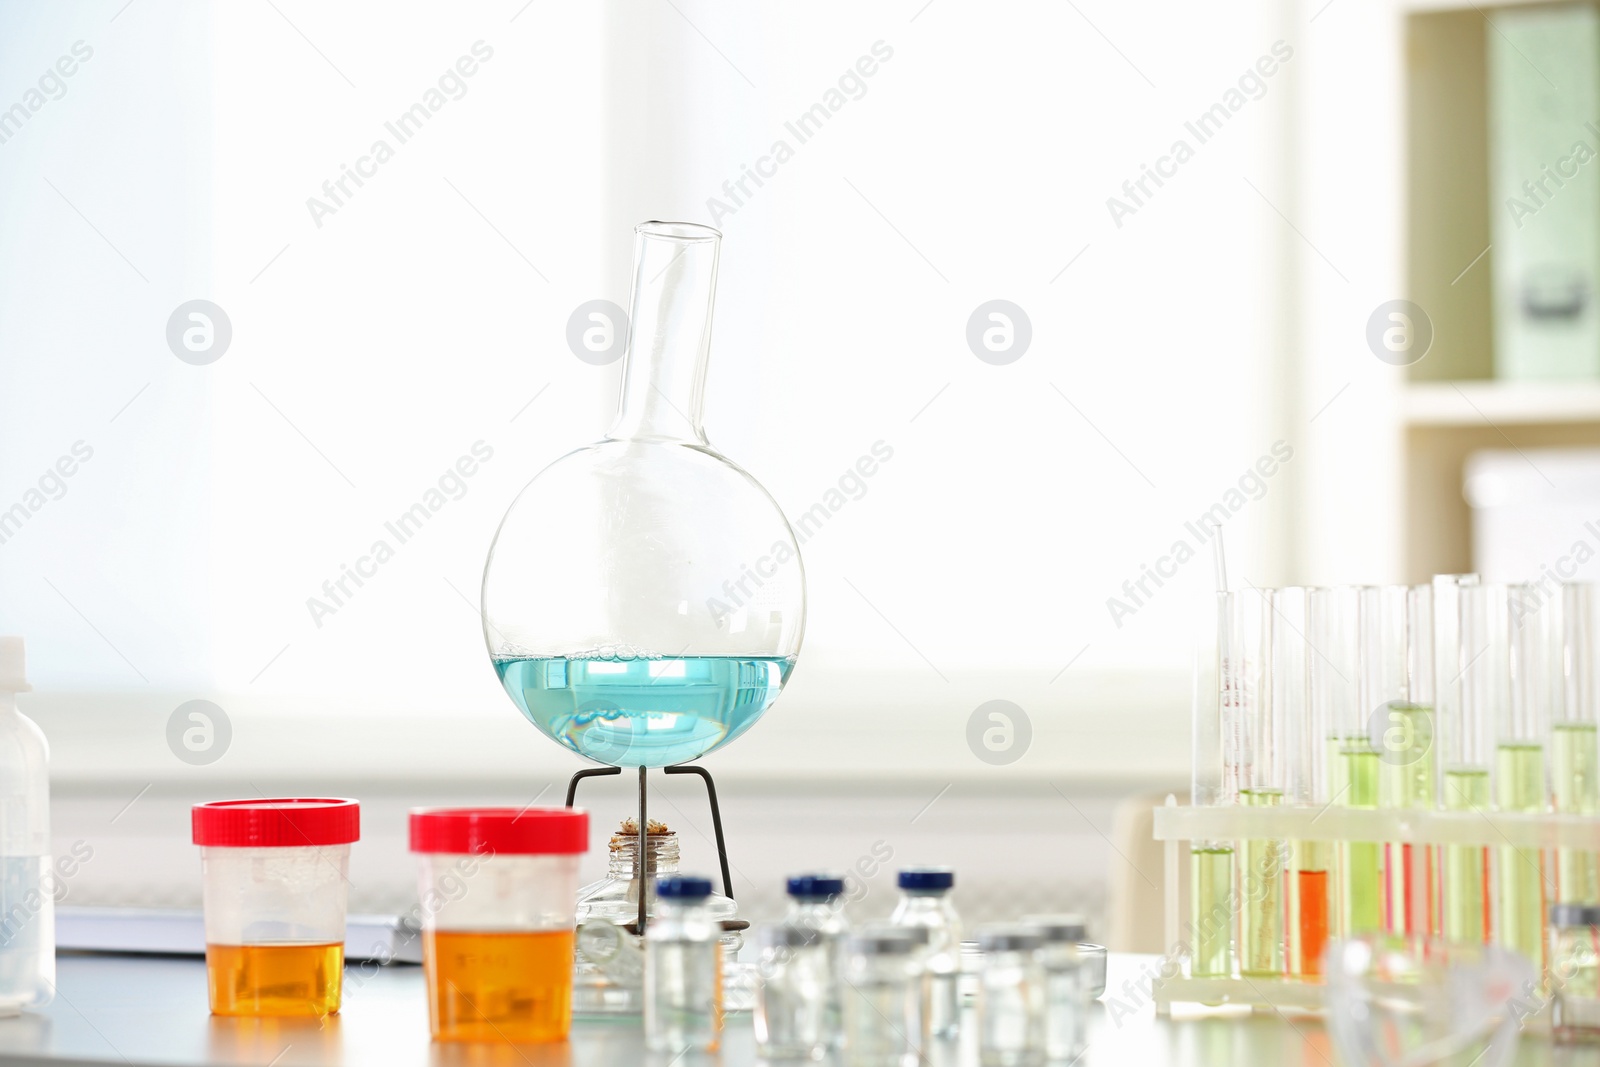 Photo of Laboratory glassware on table indoors. Research and analysis